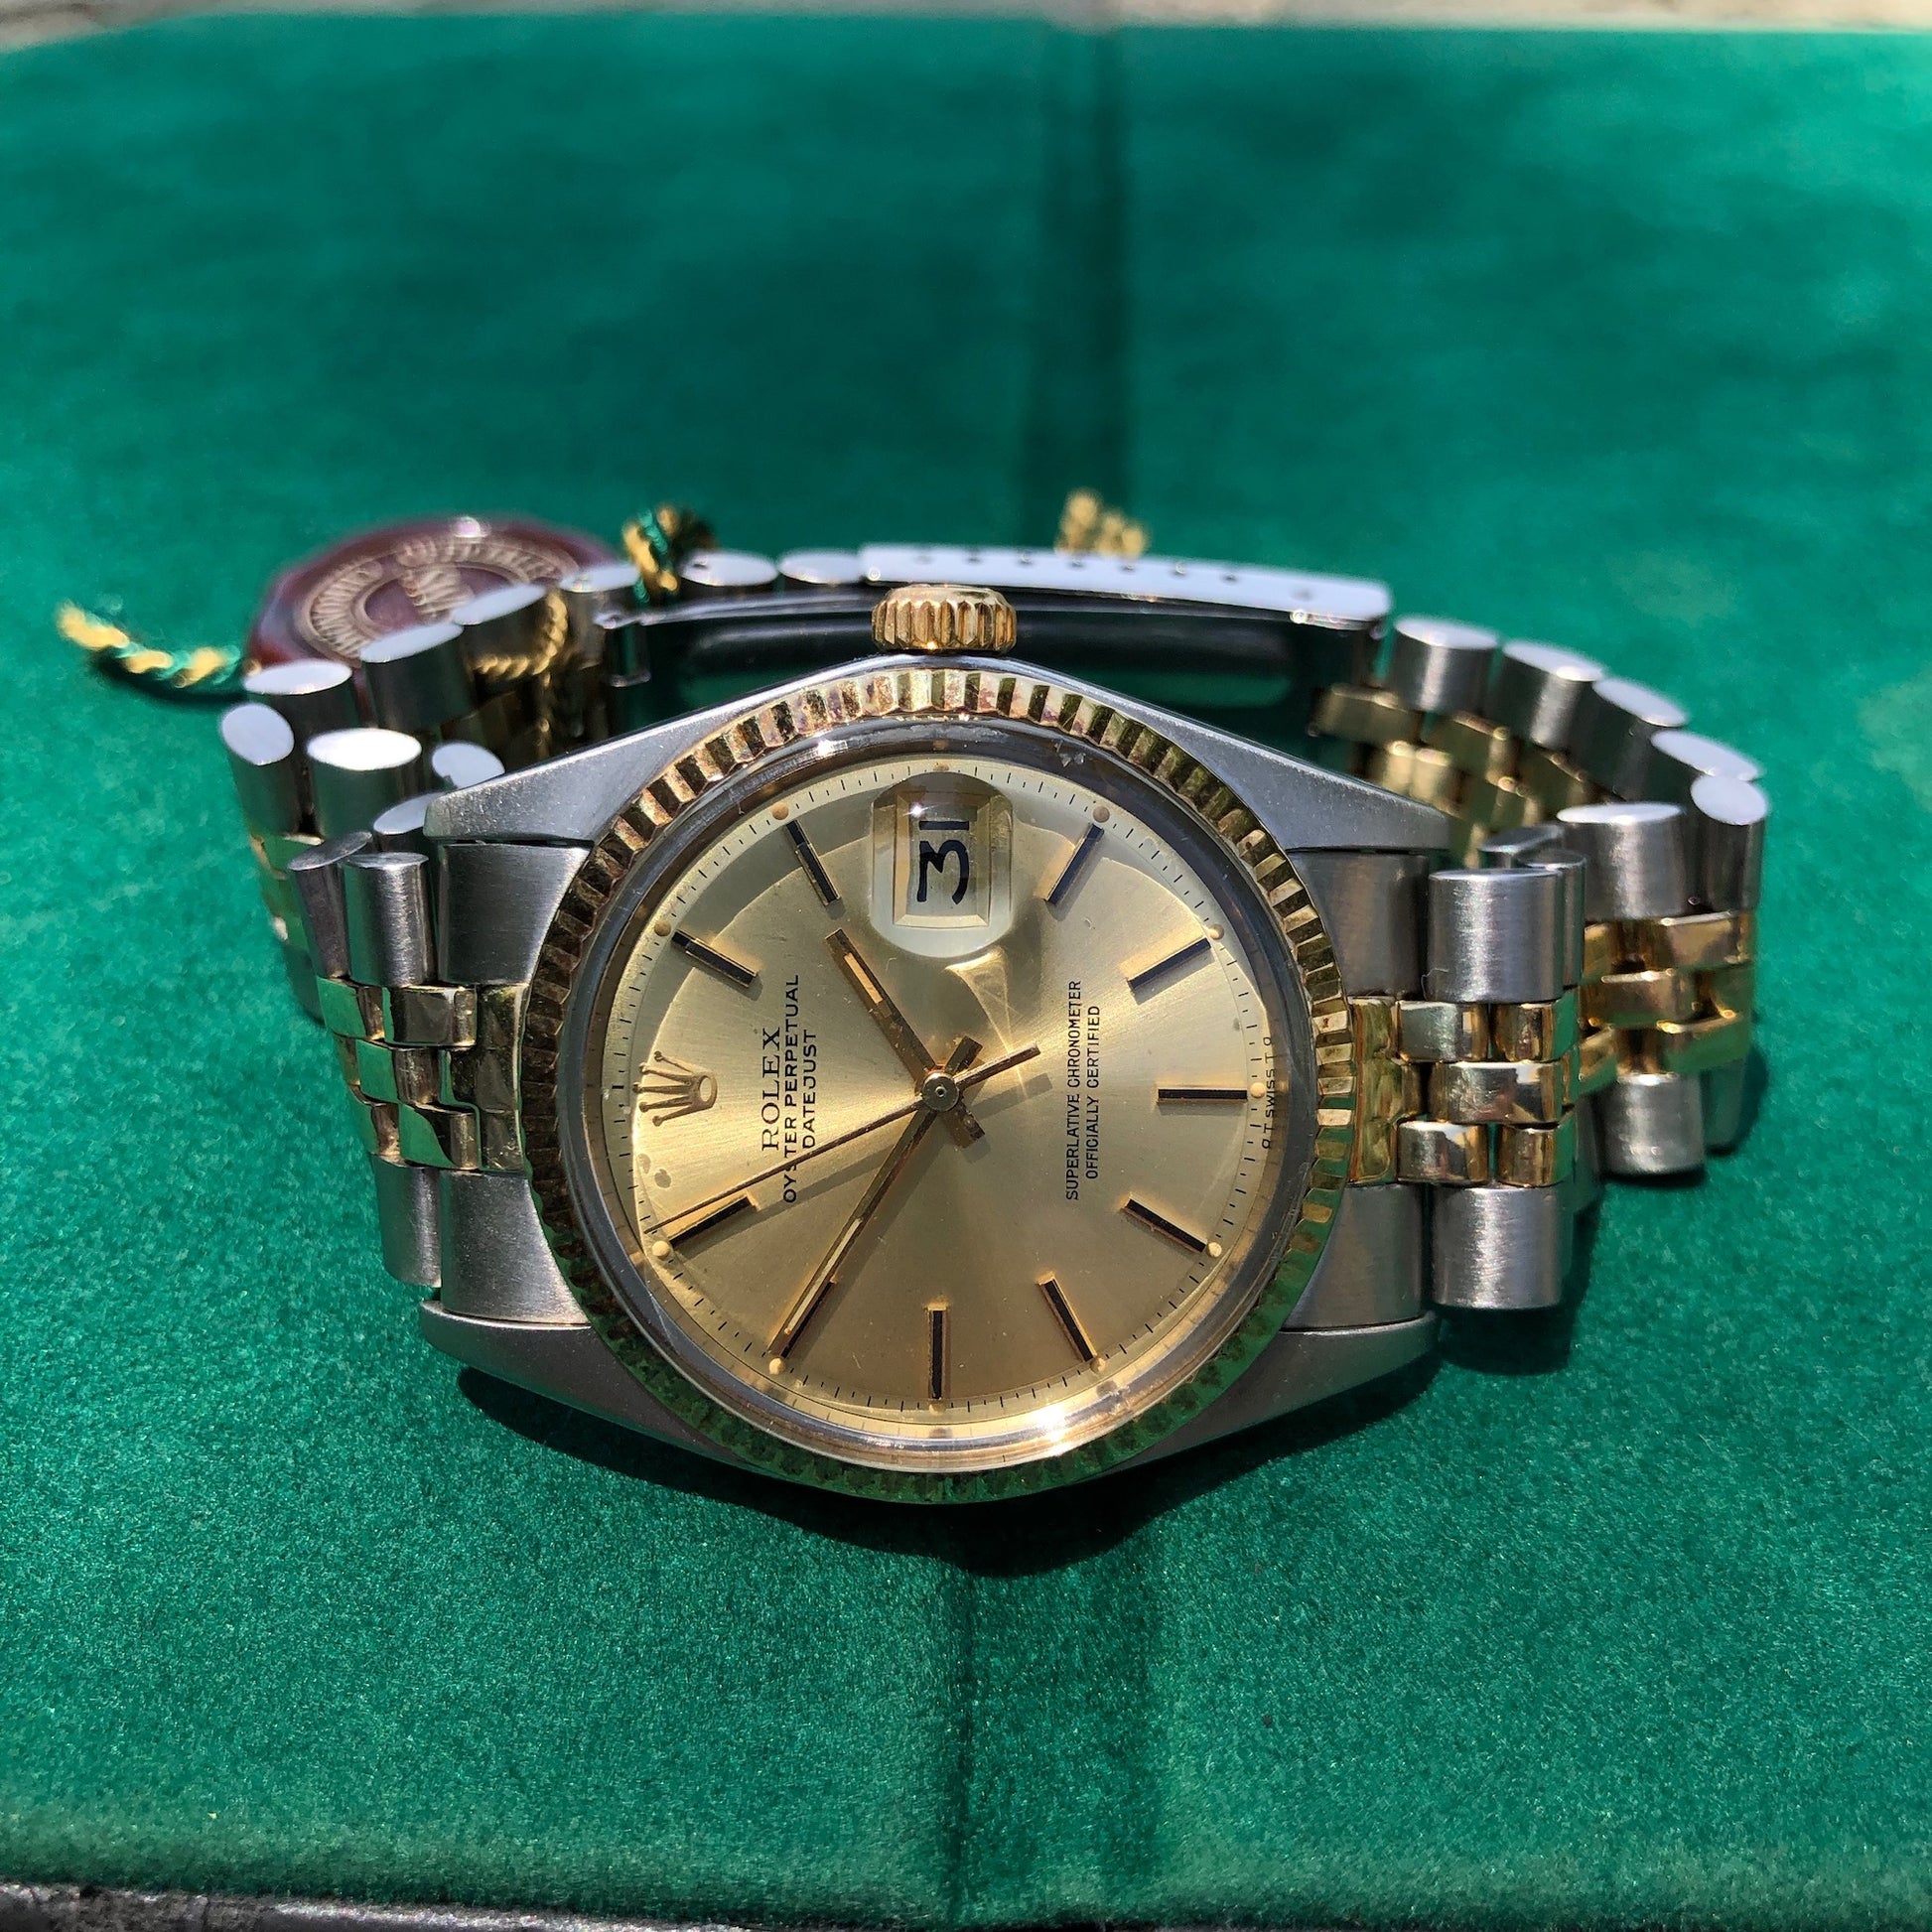 Vintage Rolex Datejust 1601 Sigma Steel Gold Two Tone Jubilee Champagne Automatic Wristwatch Box Papers Circa 1973 - Hashtag Watch Company